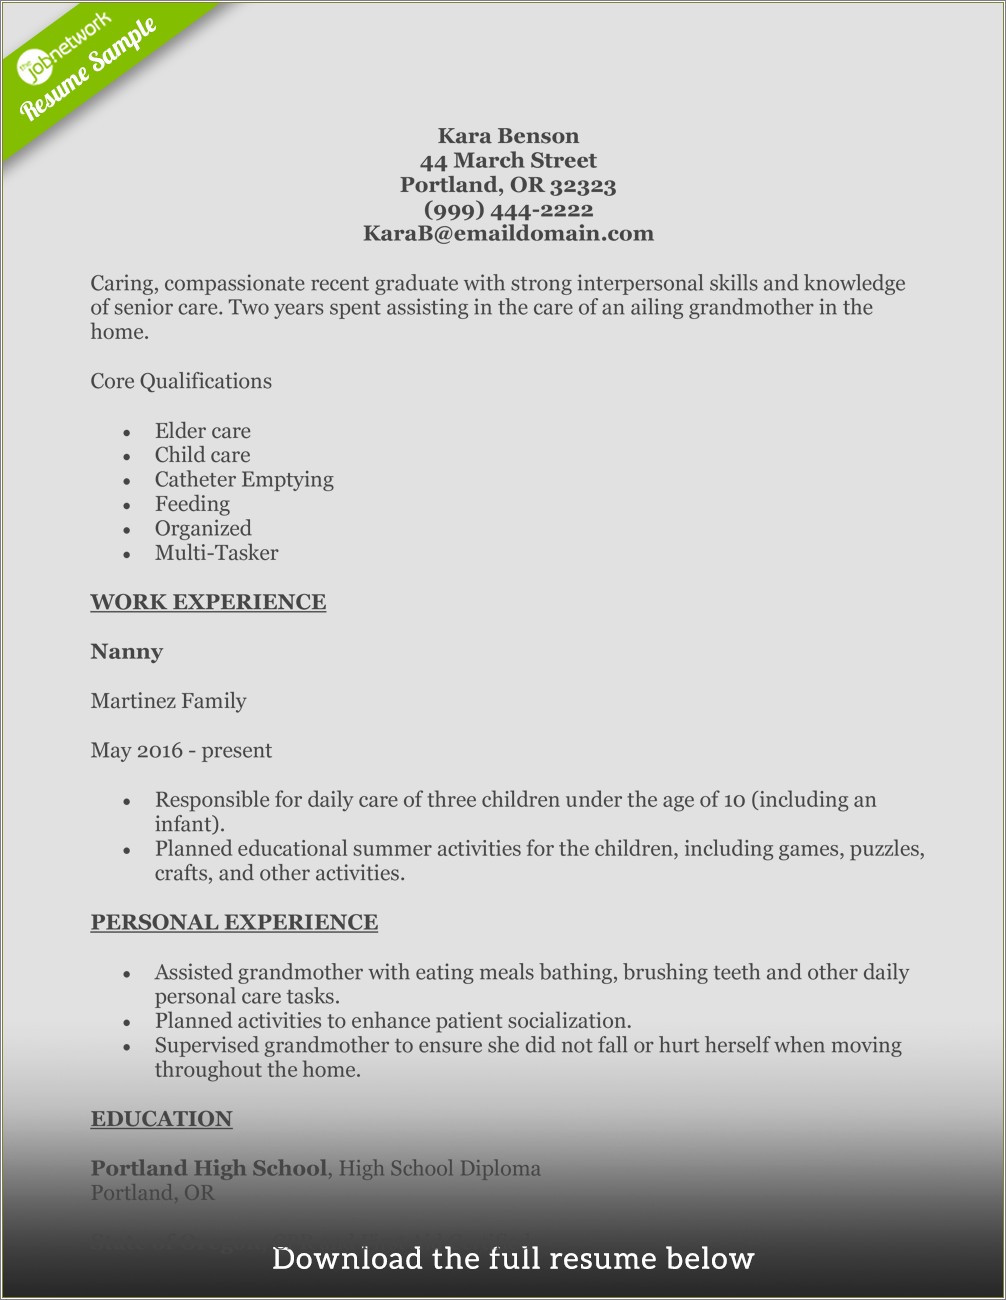 Sample Resume For New Home Health Aide